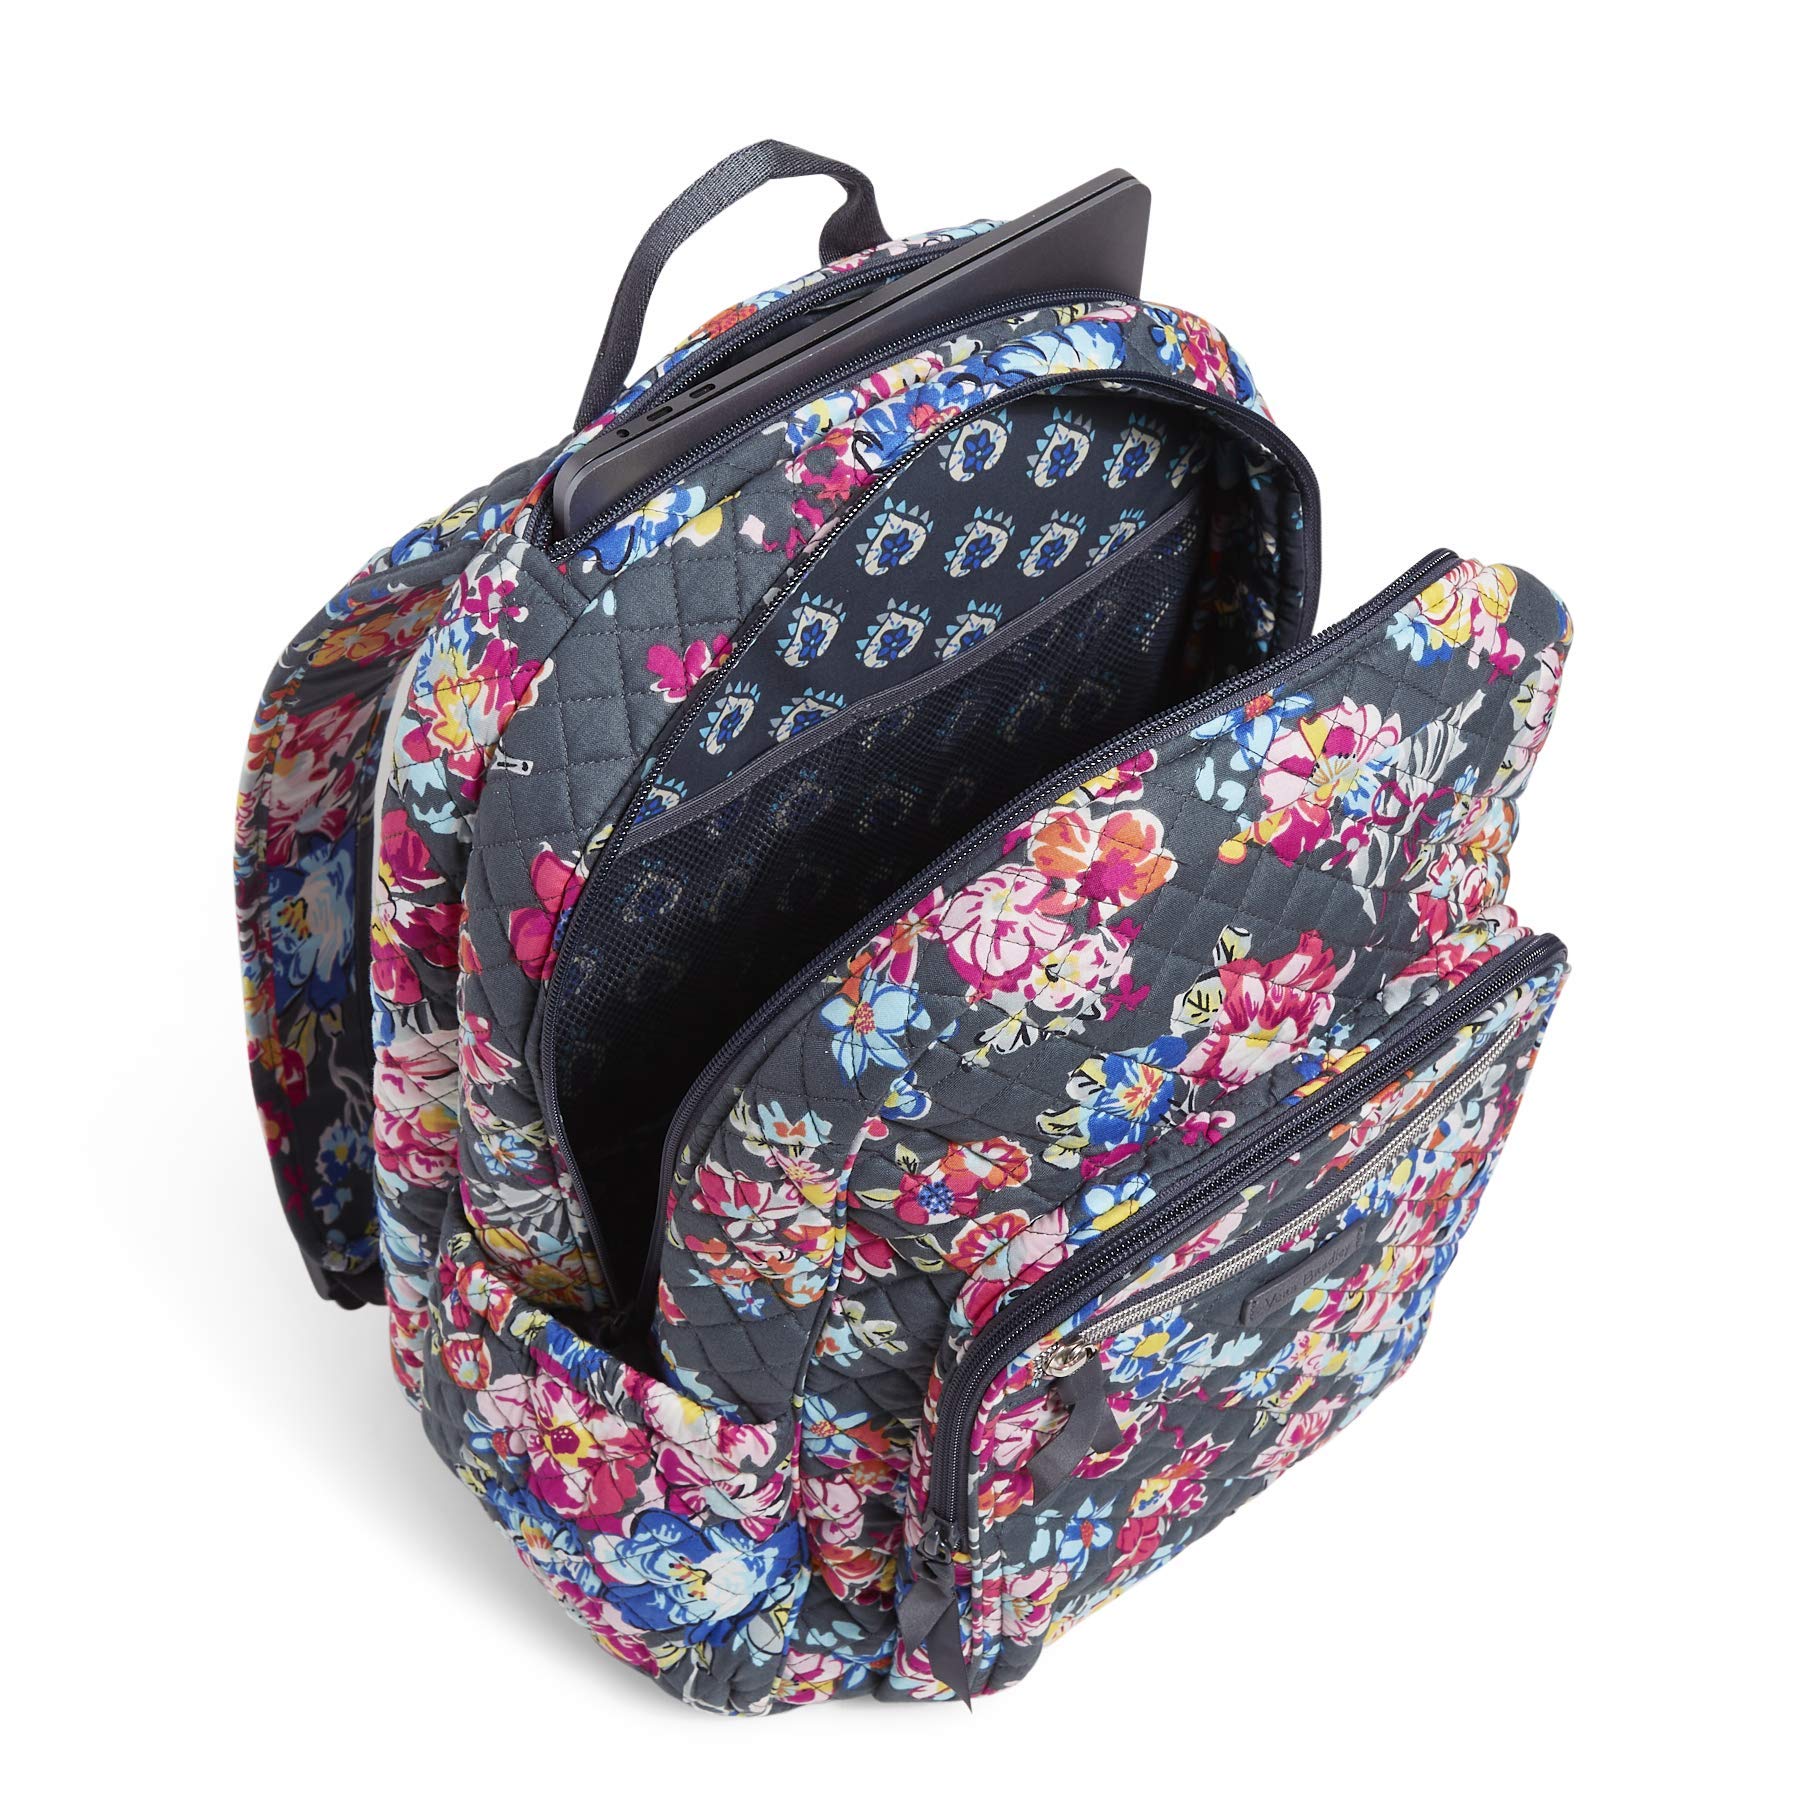 Vera Bradley Women's Cotton Campus Backpack, Pretty Posies, One Size